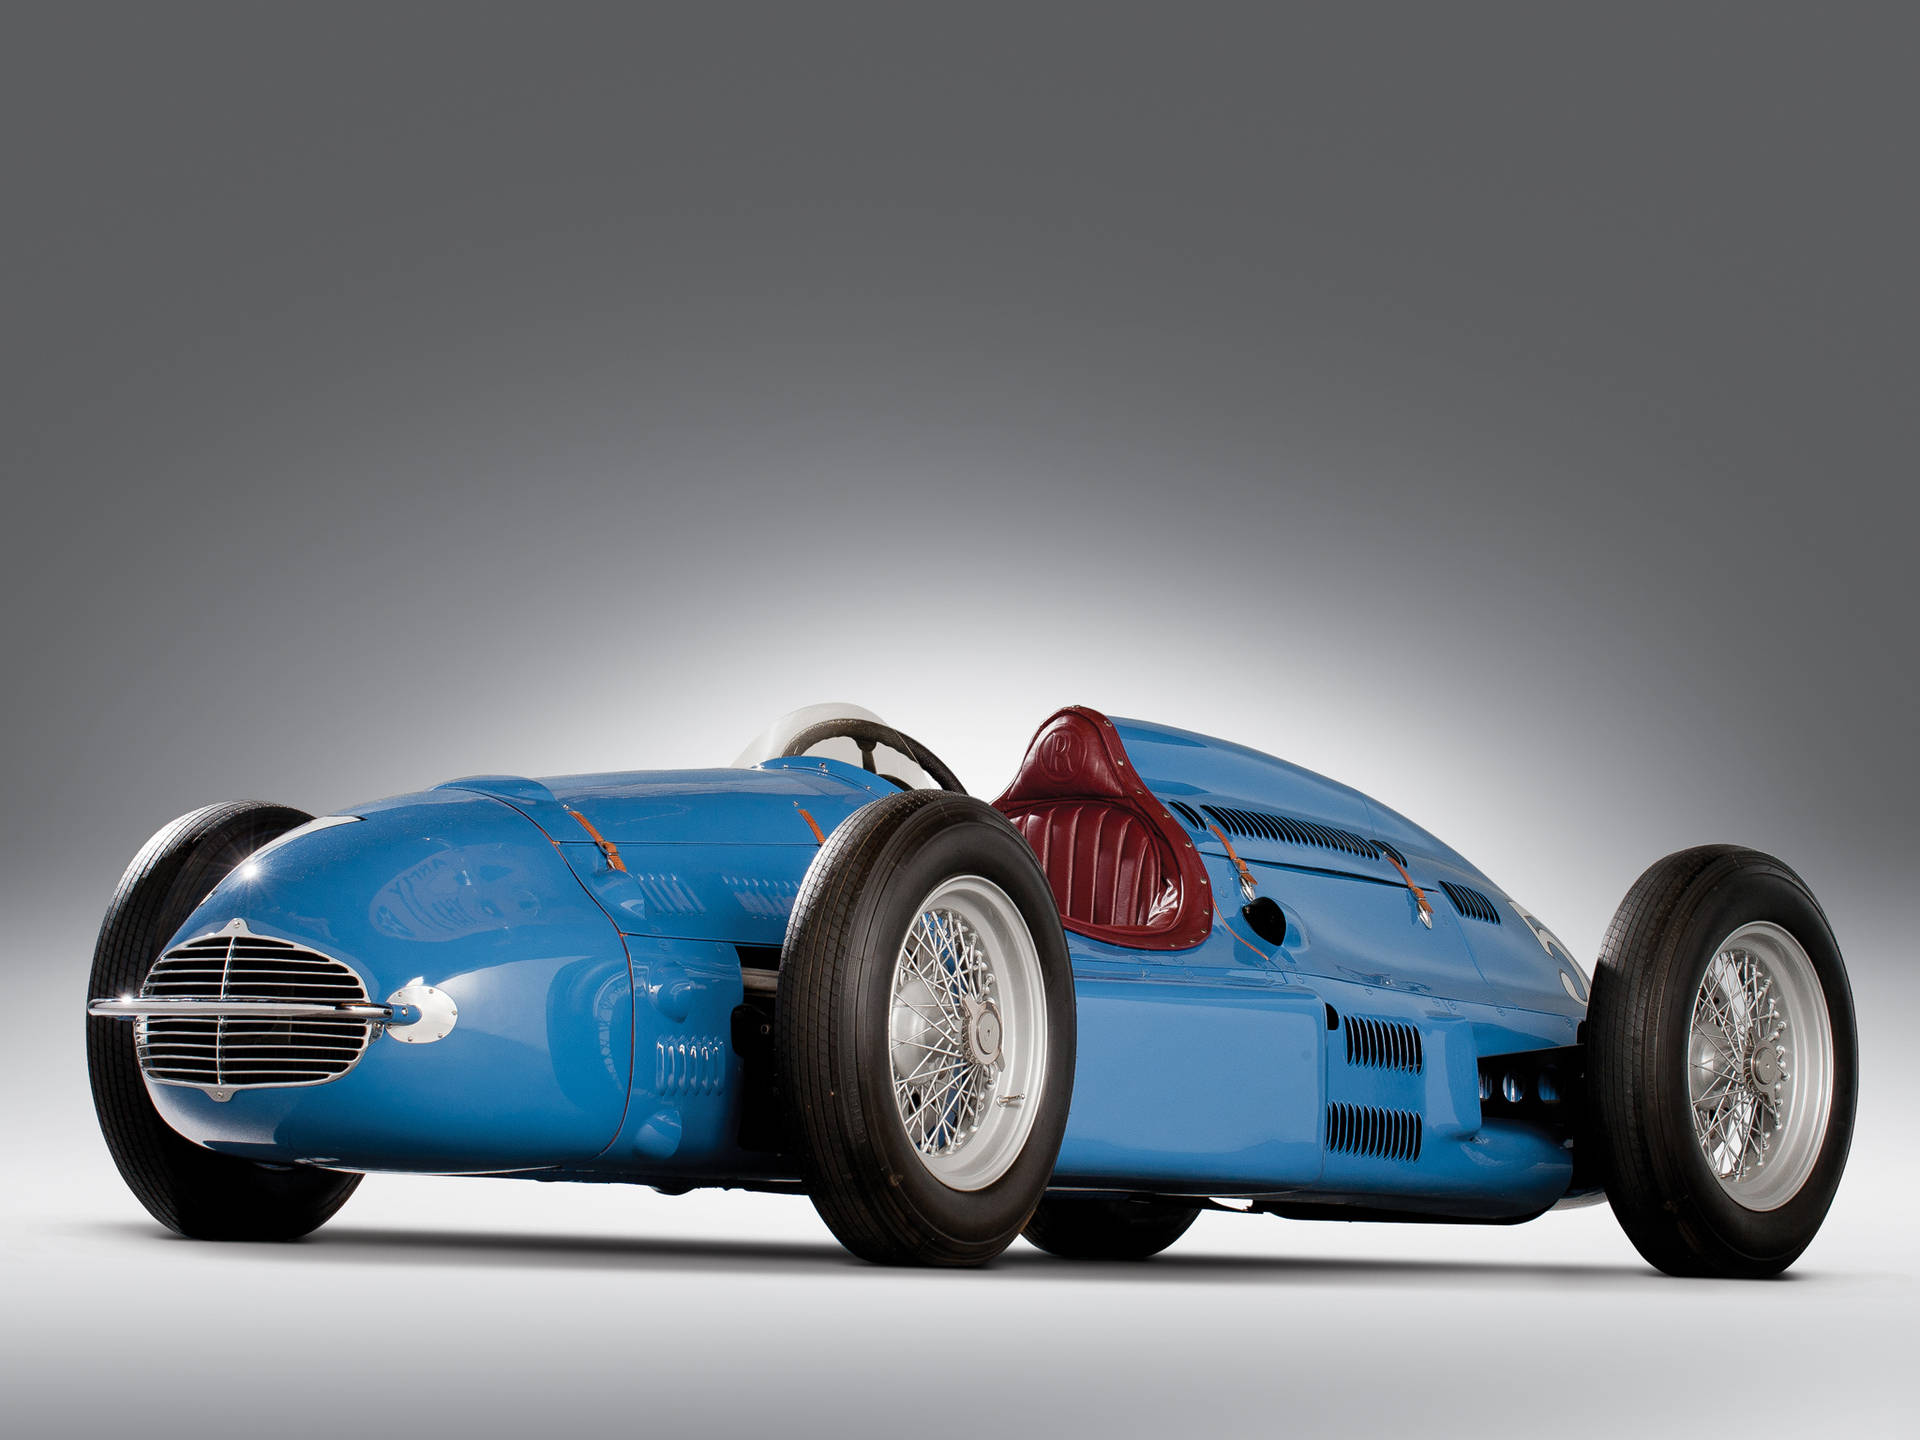 Vintage Blue F1 Race Car at the Indianapolis 500 Wallpaper